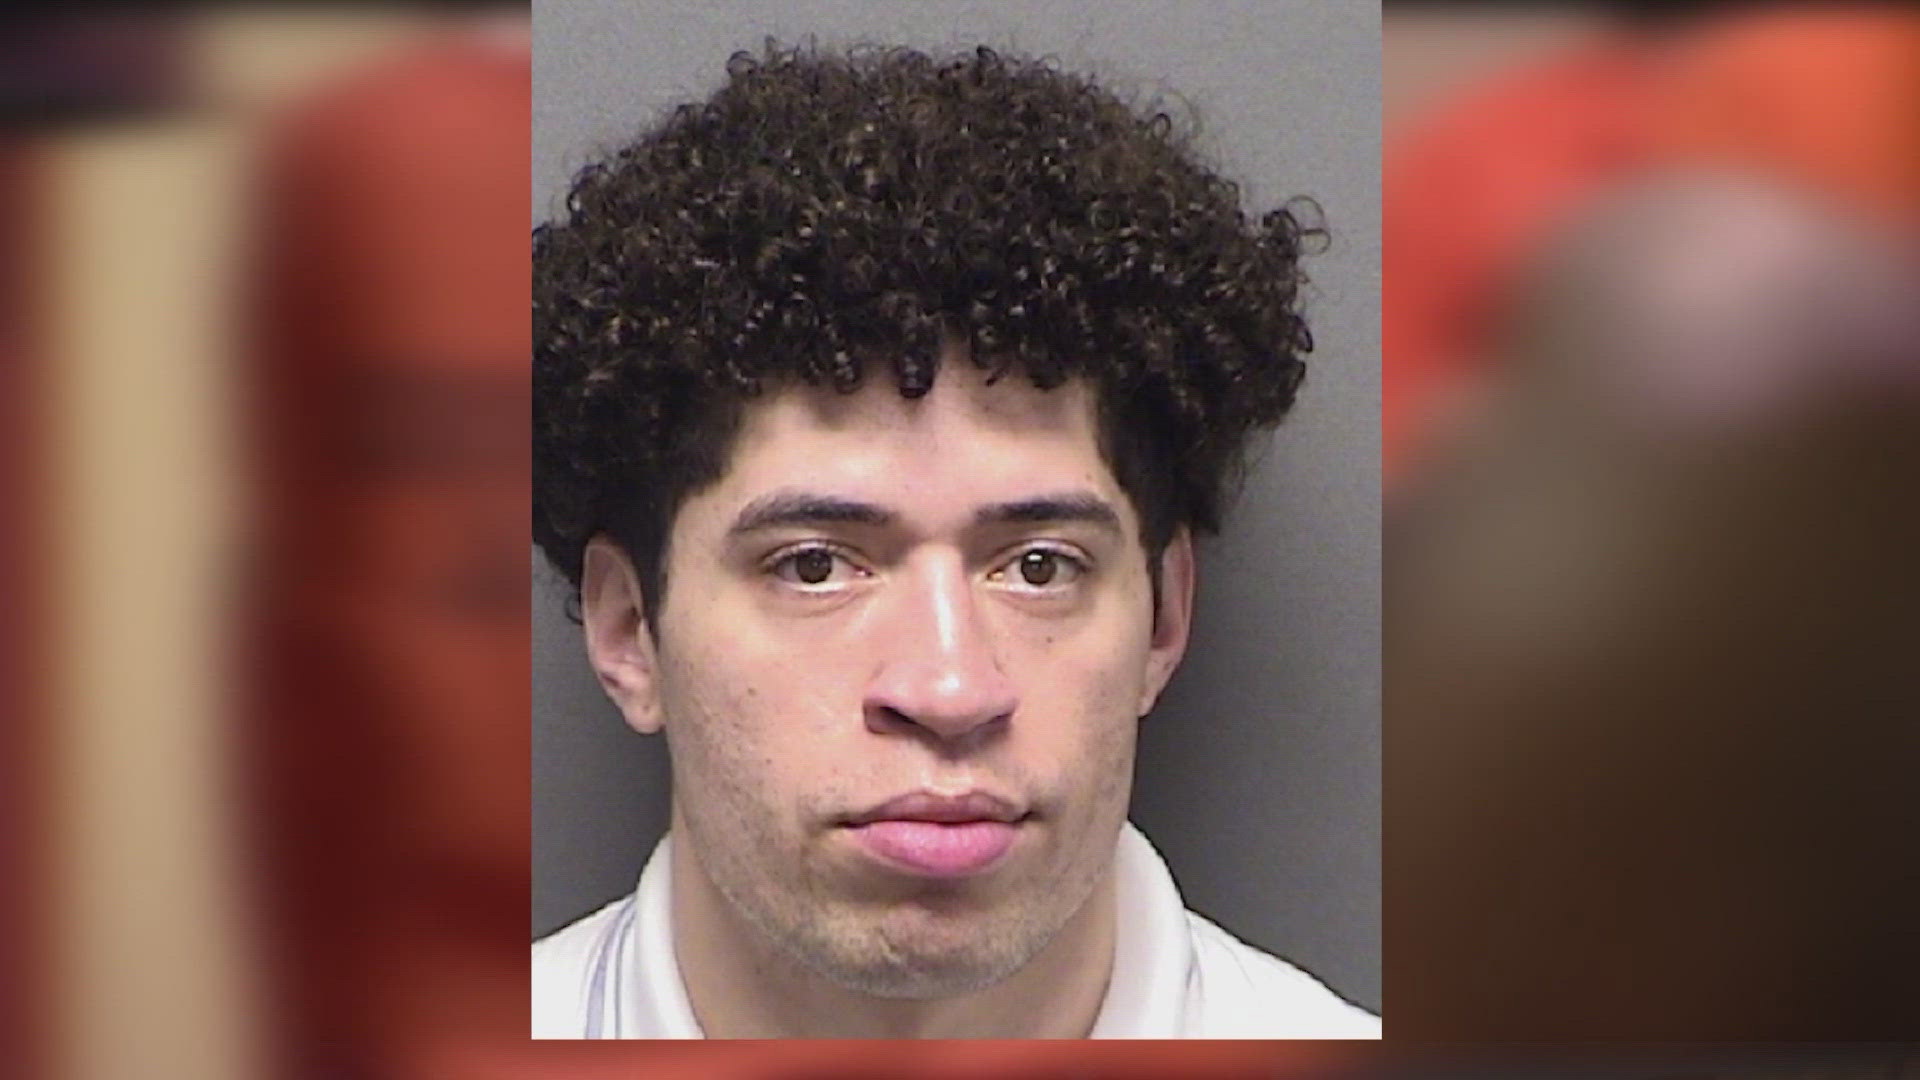 San Antonio police say the man offered the victim a ride home. They ended up at his apartment complex.